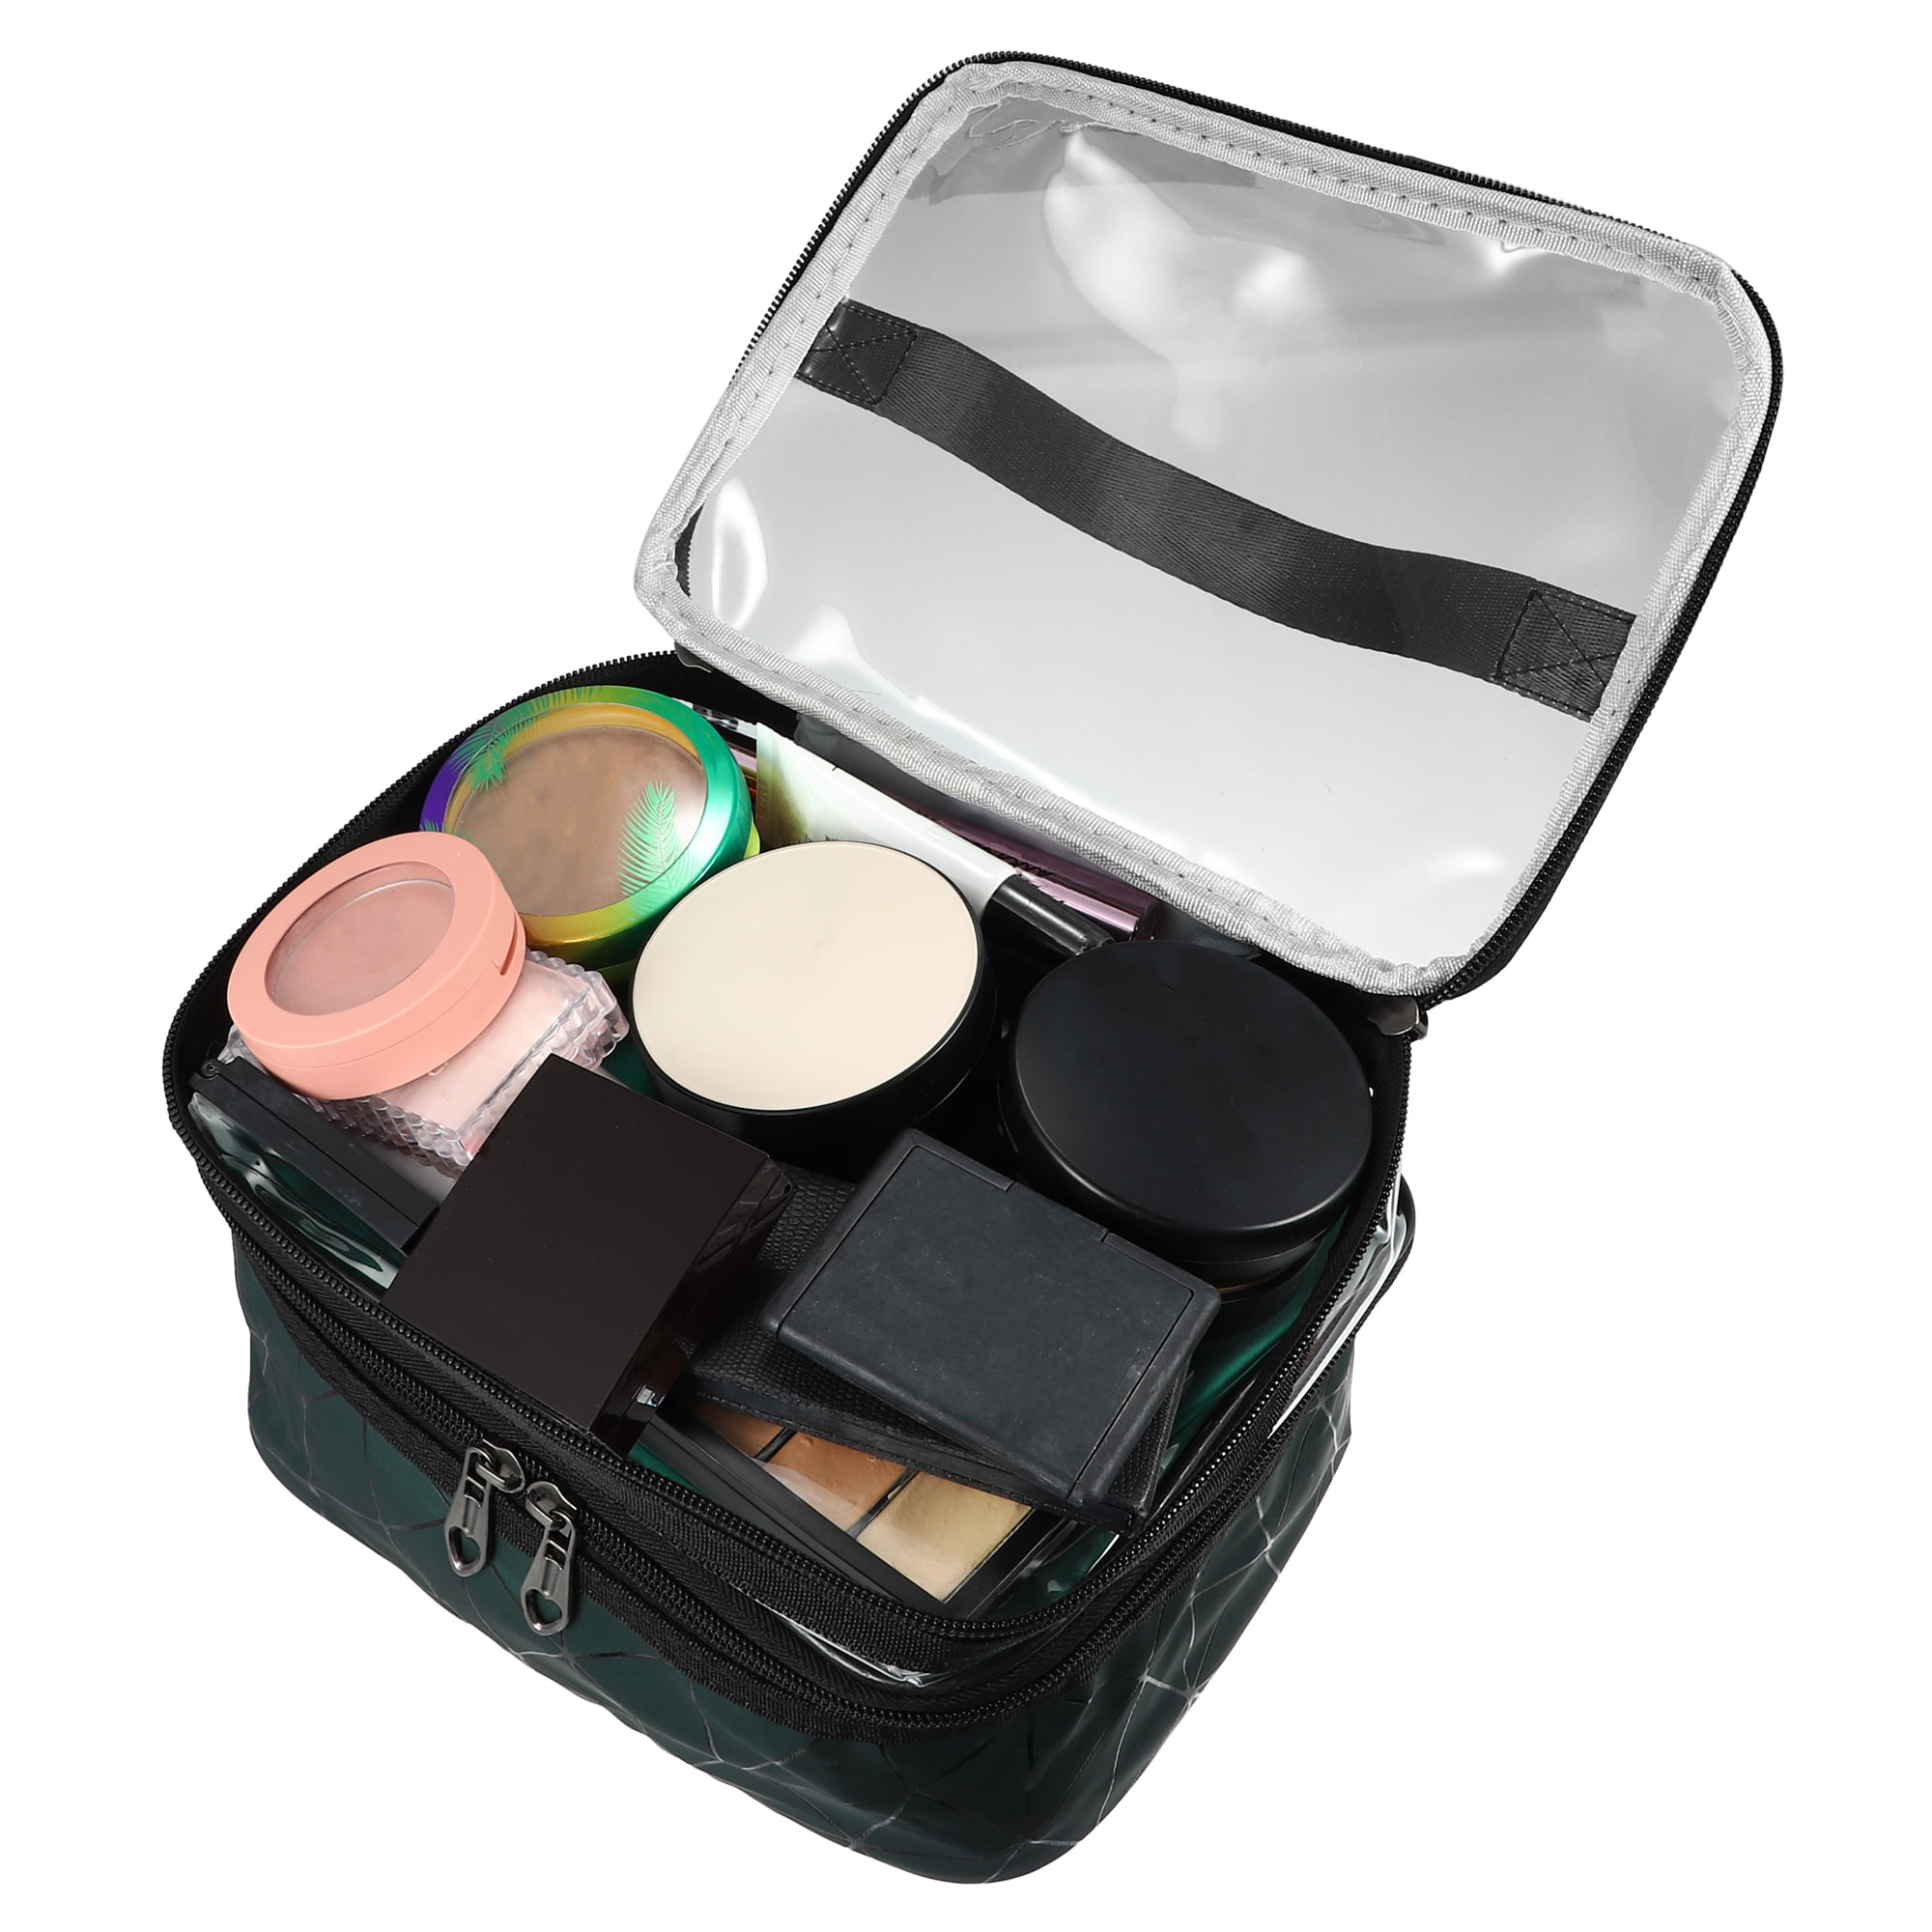 AllTopBargains 1 Cosmetic Case Makeup Bag Clear Storage Organizer Travel Vinyl Container Pouch